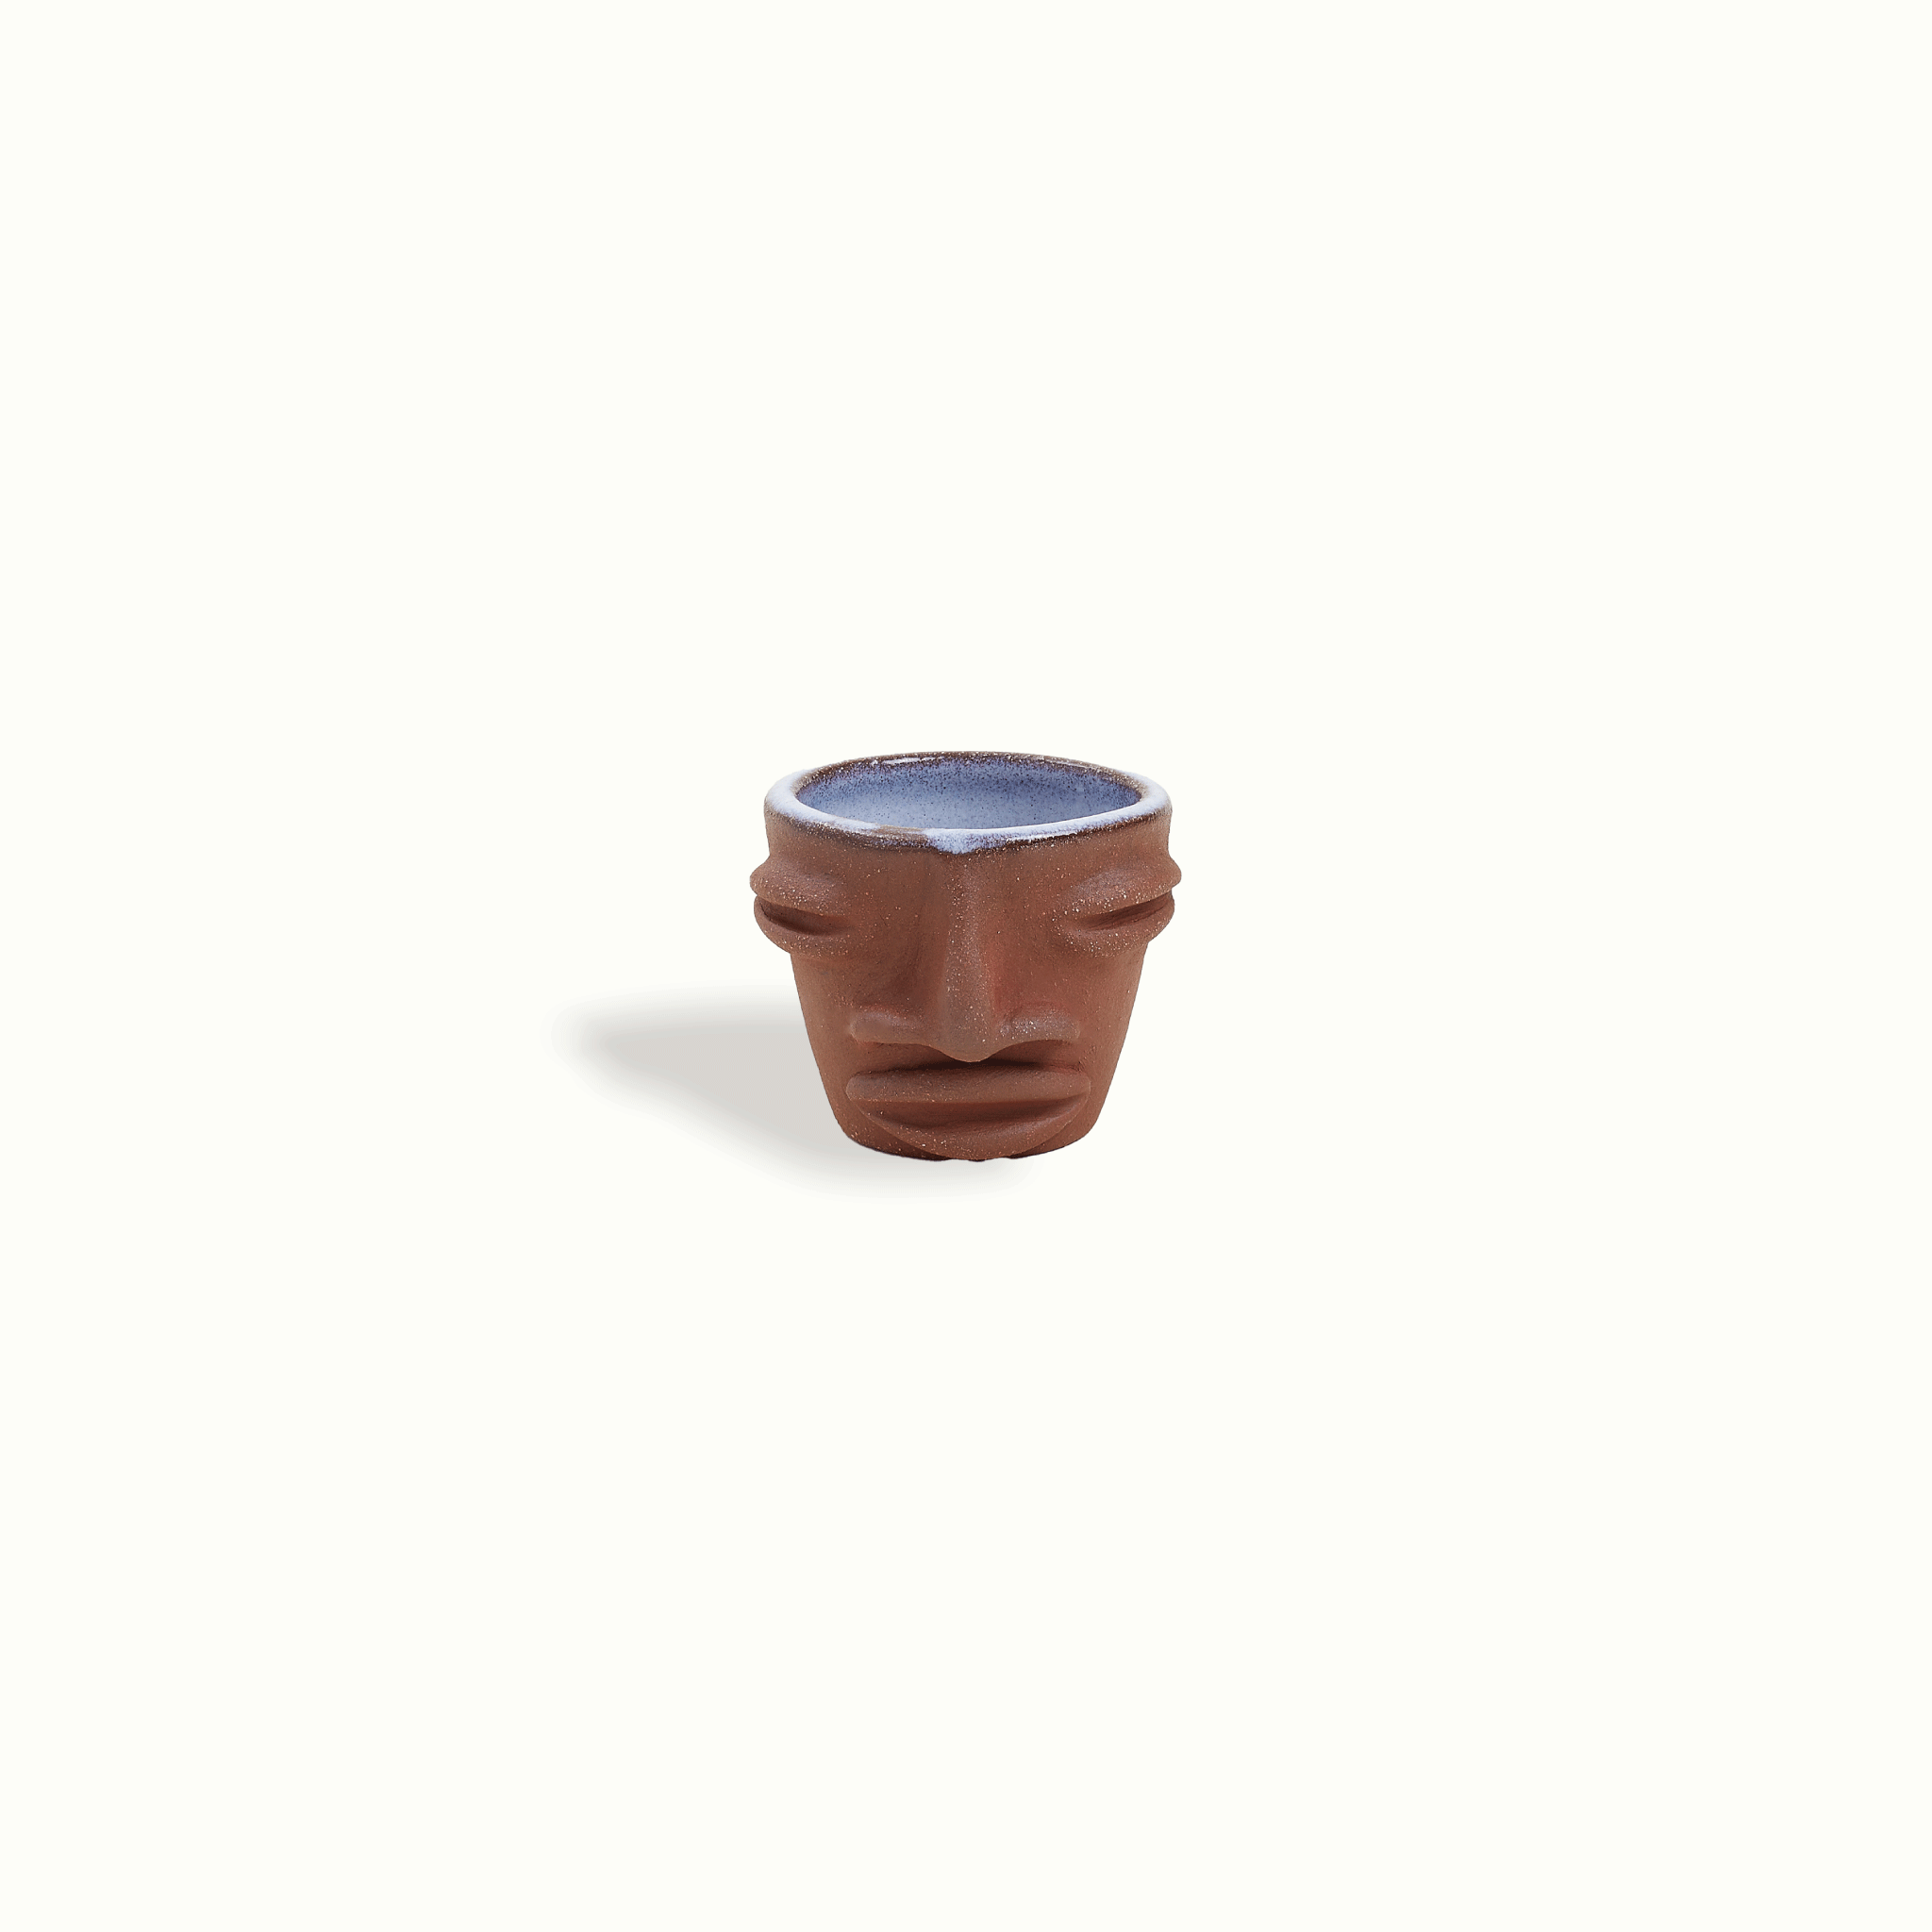 Sculpted Face Terra Cotta Shot Cup Adrianna Lemus for Hotel Ynez Solvang by Nomada Deco